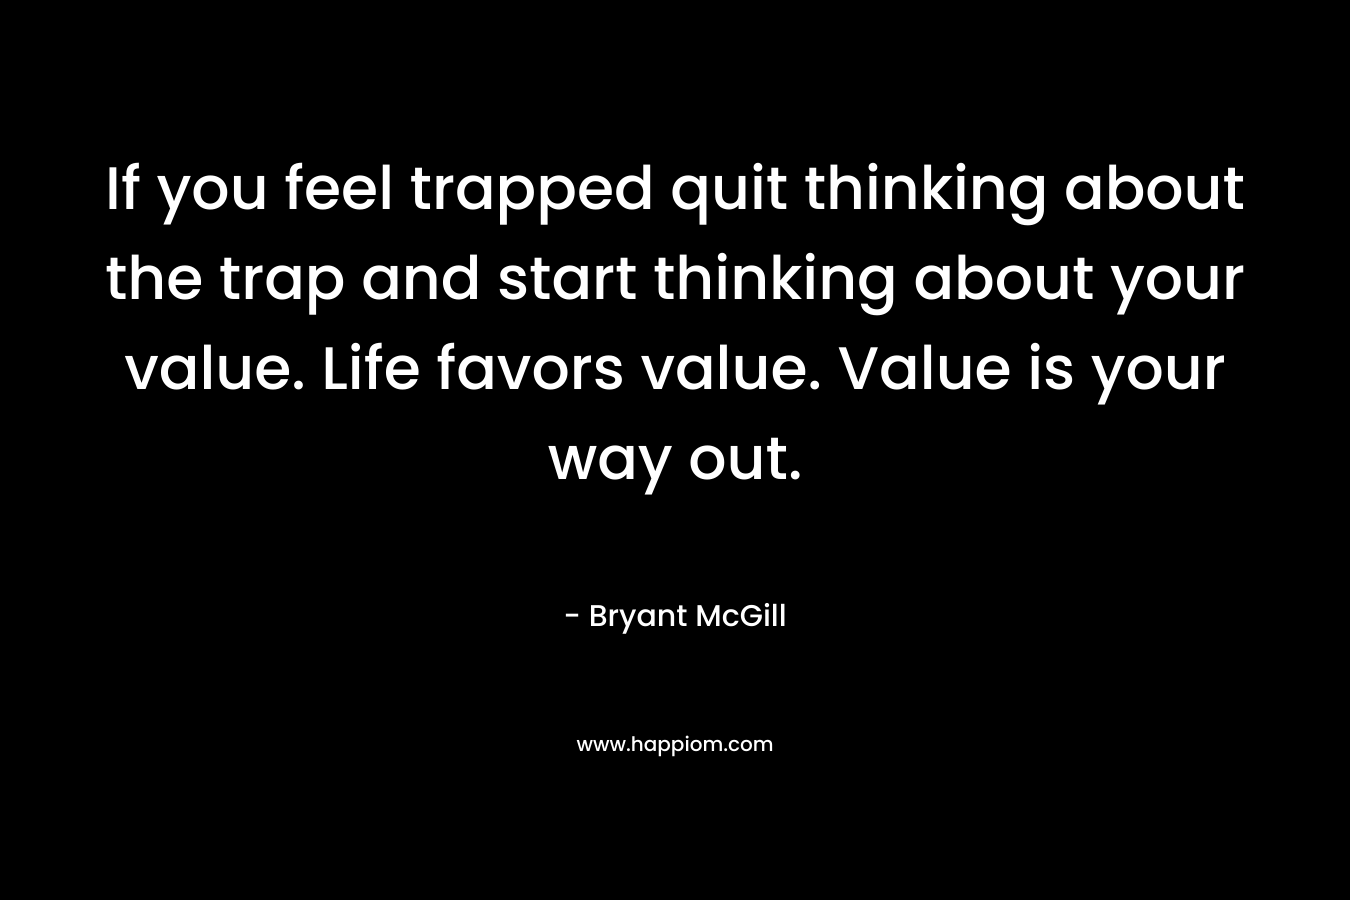 If you feel trapped quit thinking about the trap and start thinking about your value. Life favors value. Value is your way out.